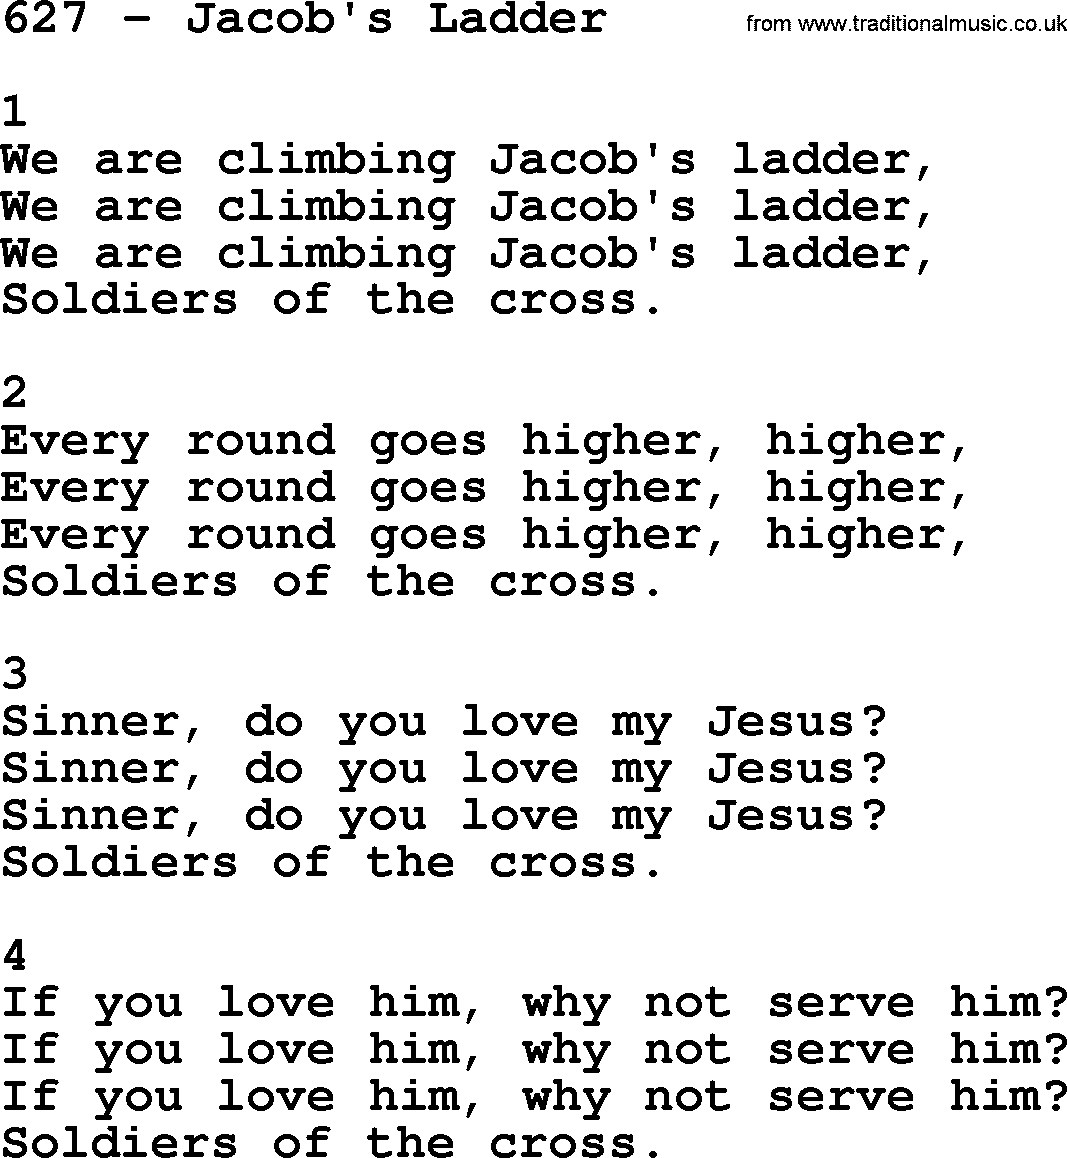 Complete Adventis Hymnal, title: 627-Jacob's Ladder, with lyrics, midi, mp3, powerpoints(PPT) and PDF,